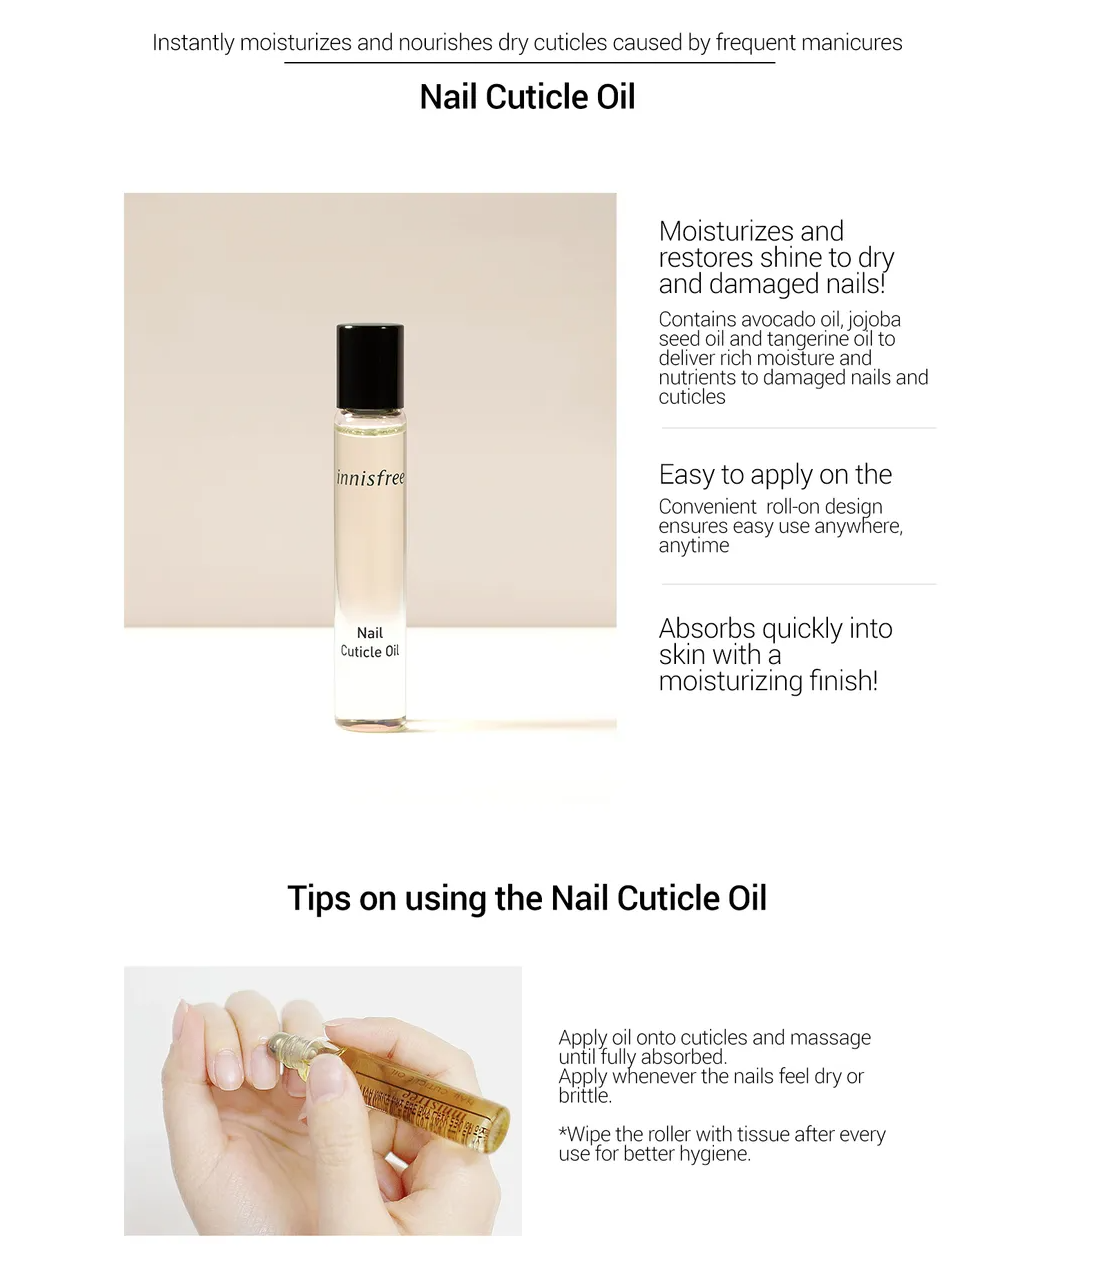 The Black Pearl Blog - UK beauty, fashion and lifestyle blog: The easiest  way of removing glitter nail polish - Innisfree Peel Off Base Coat Review